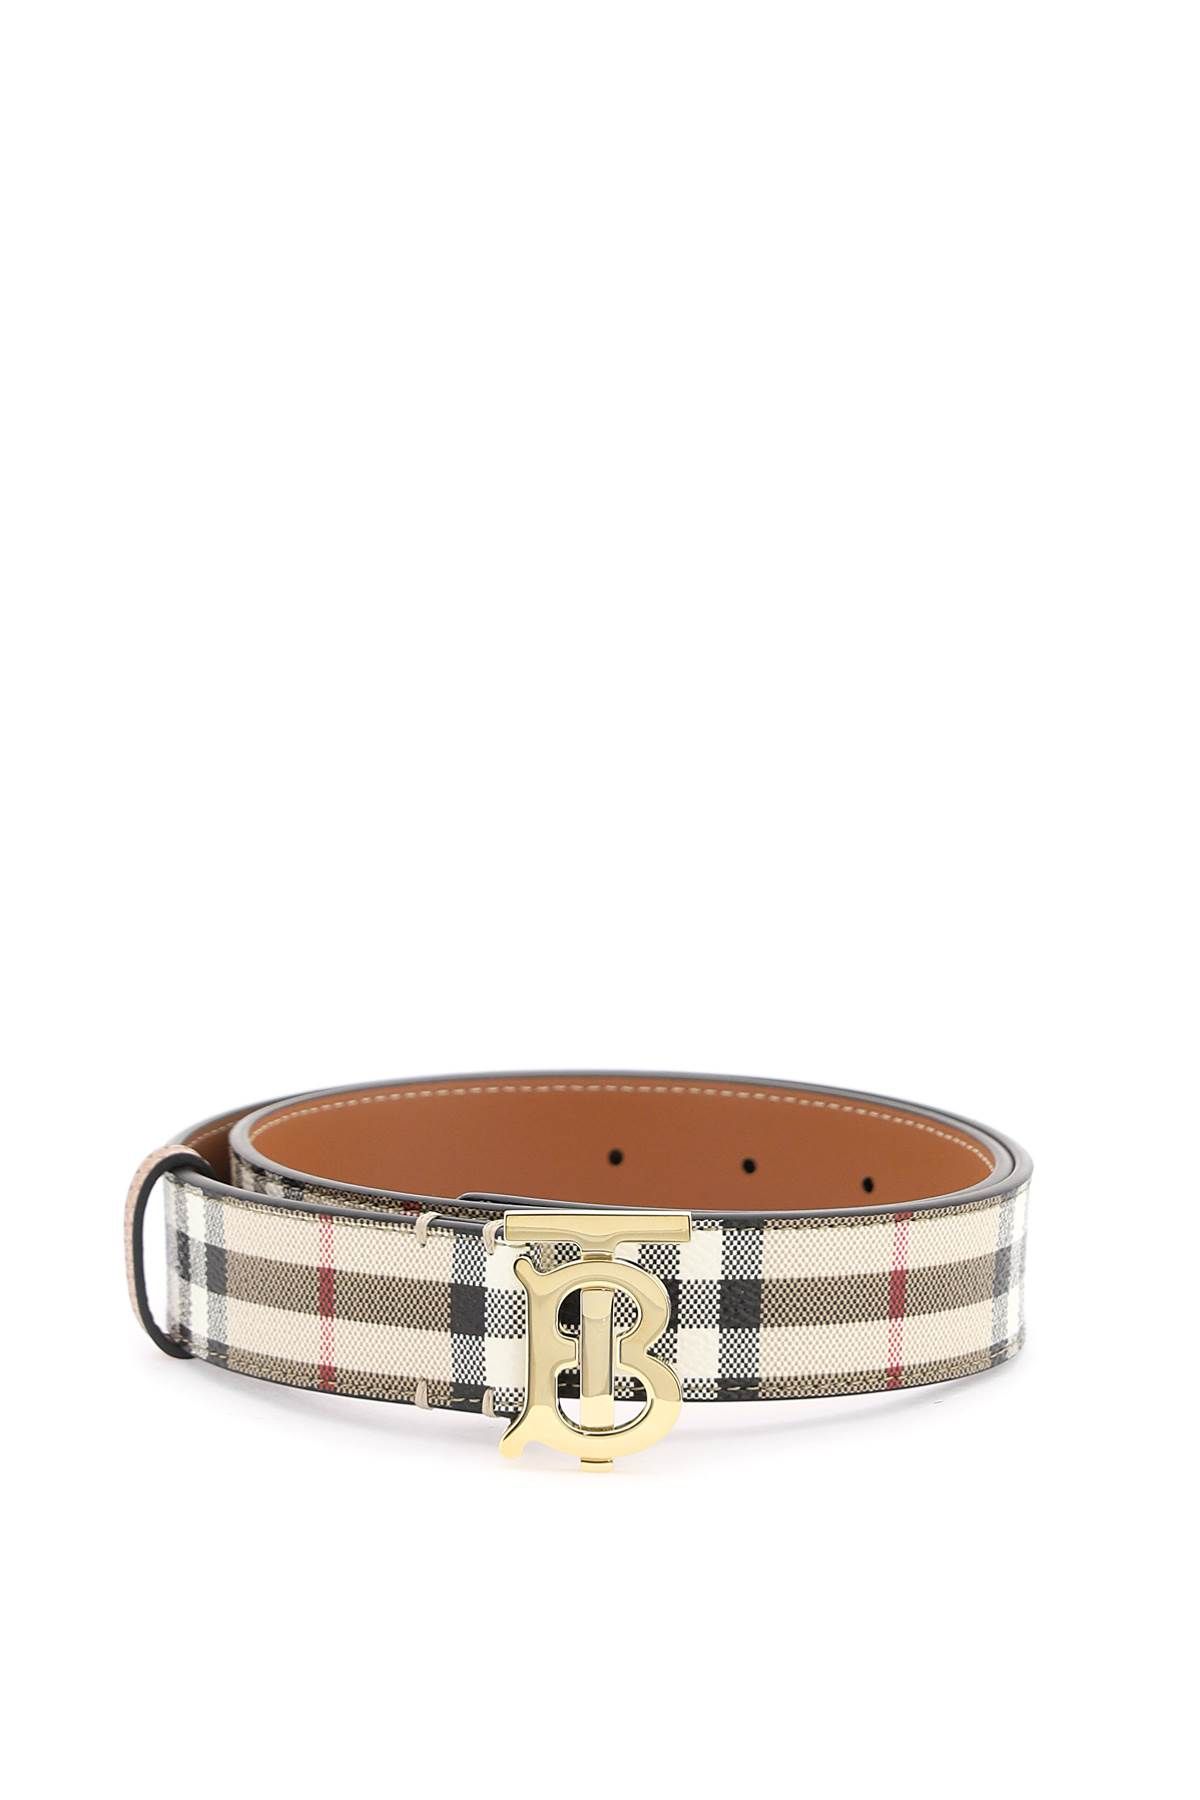 Burberry Check Tb Belt In Beige,white,brown